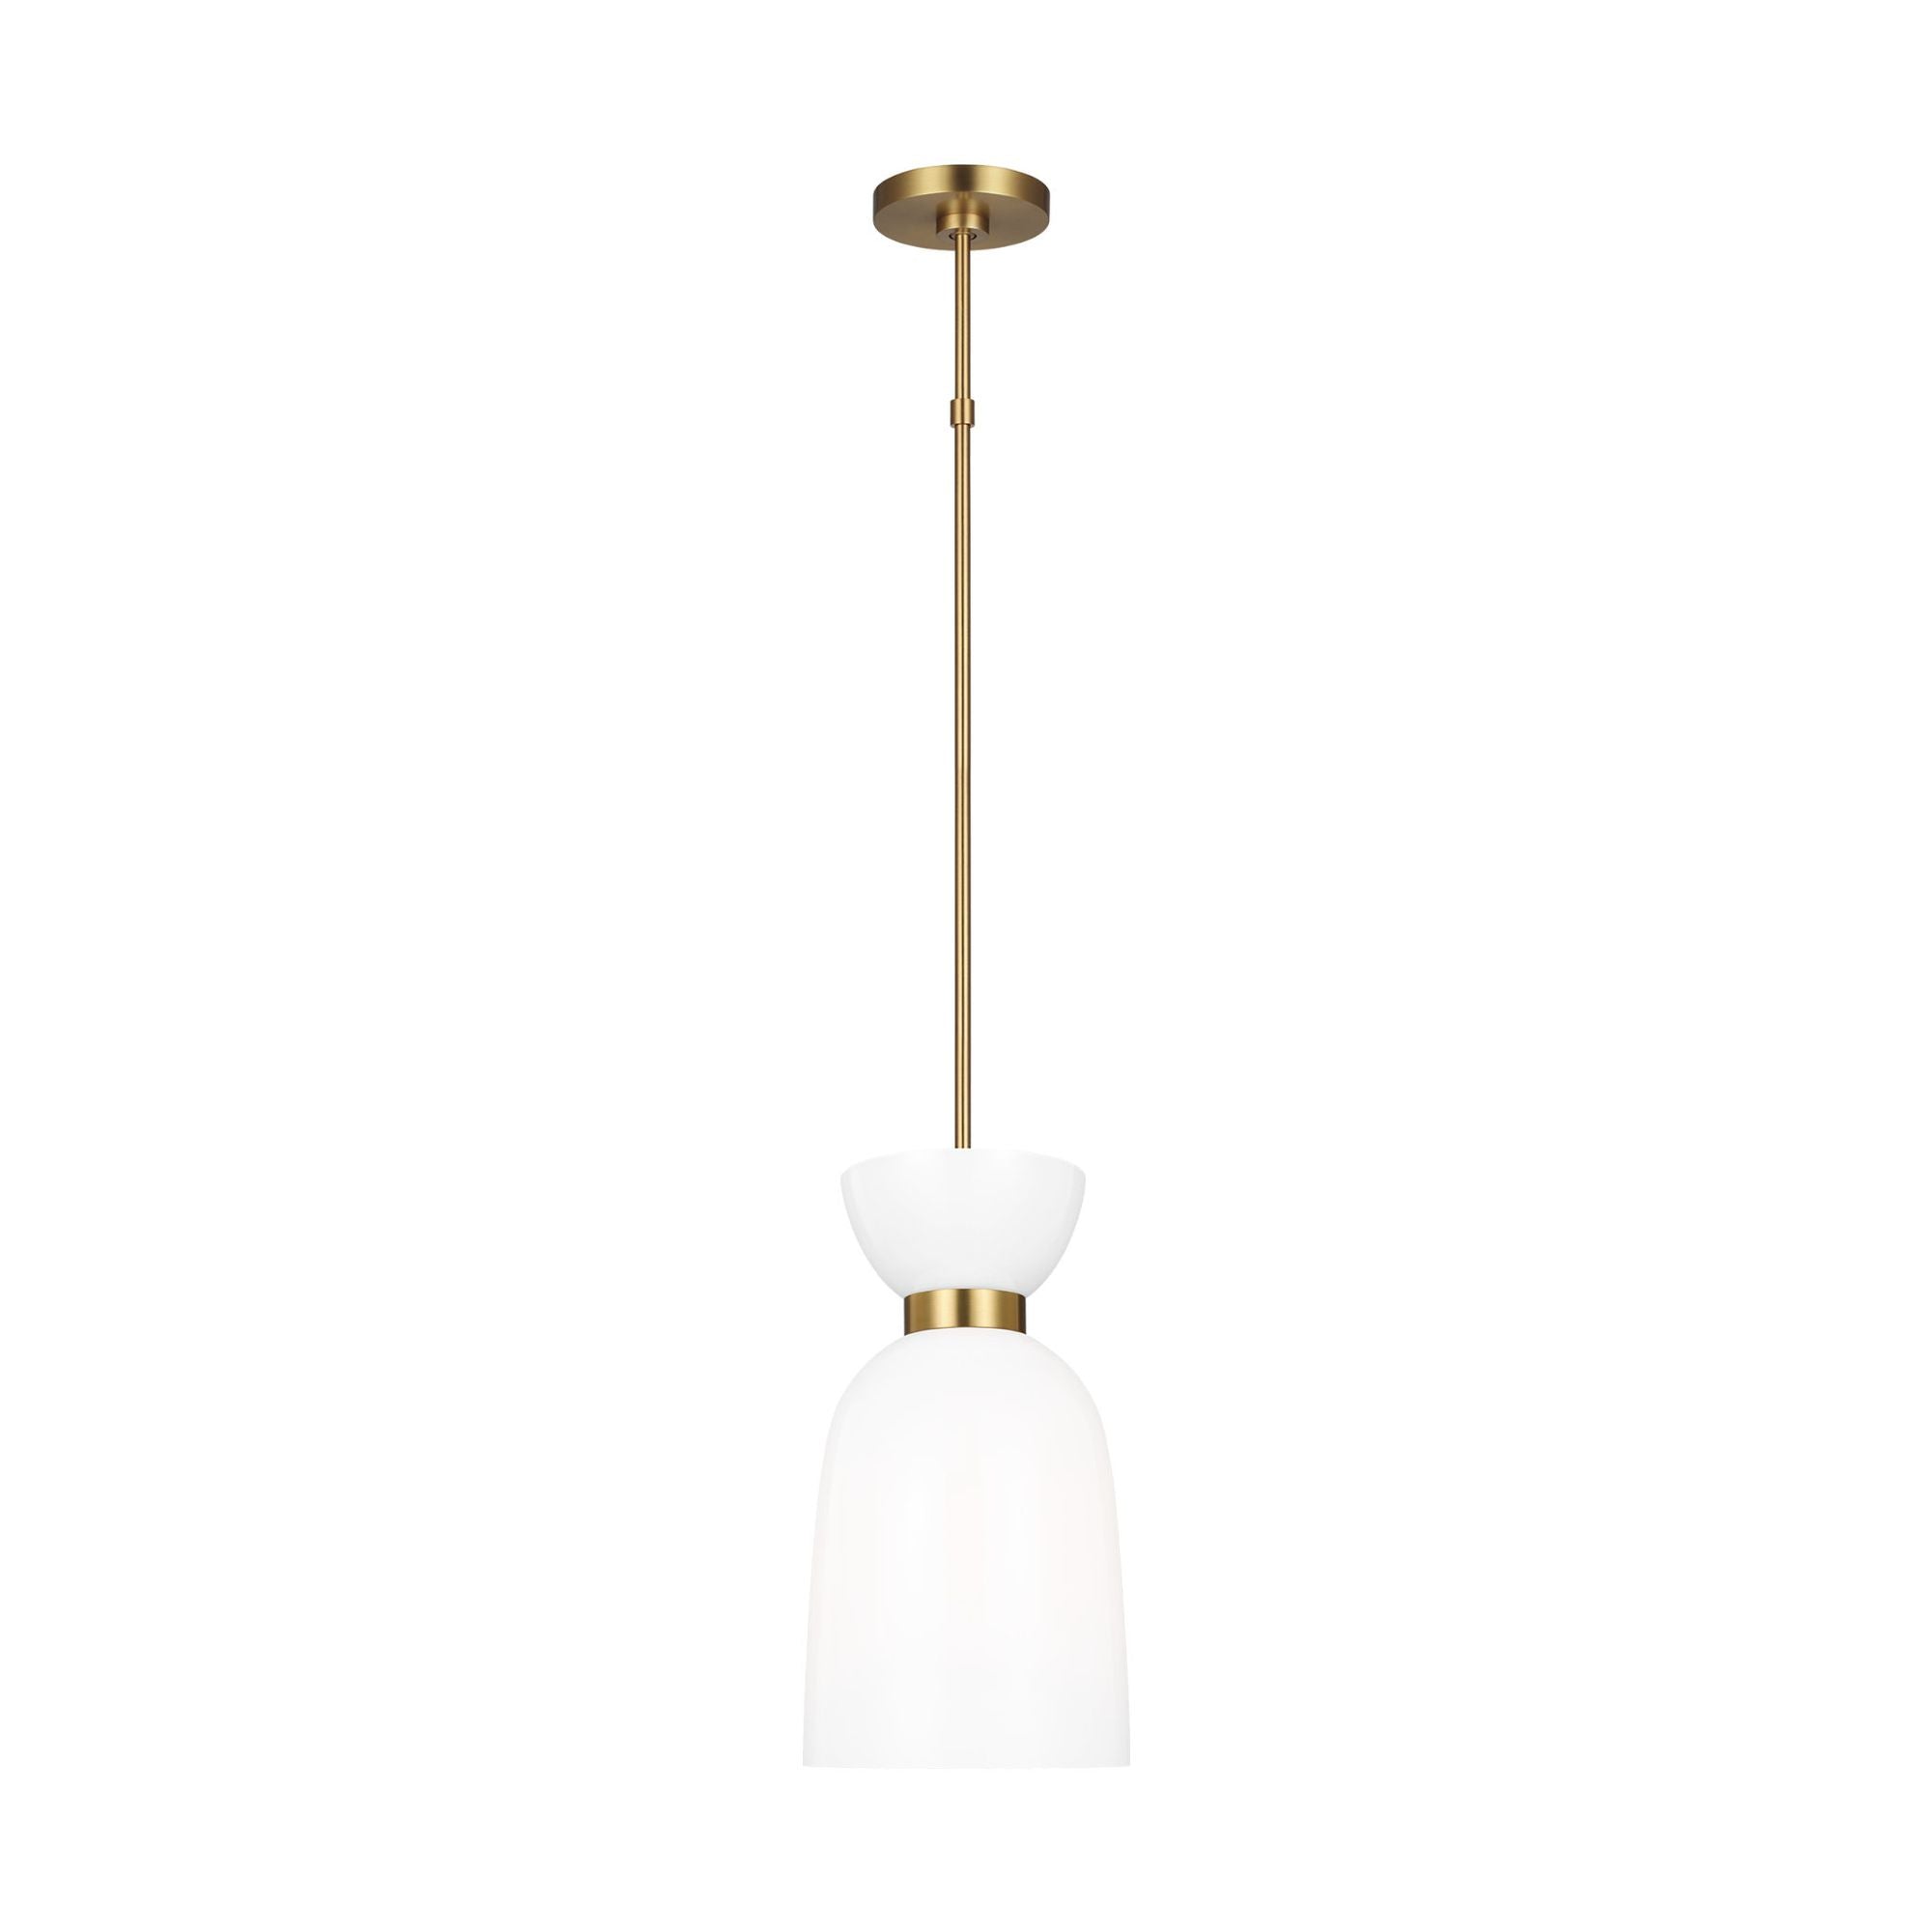 kate spade new york Londyn Tall Pendant in Burnished Brass with Milk White Glass